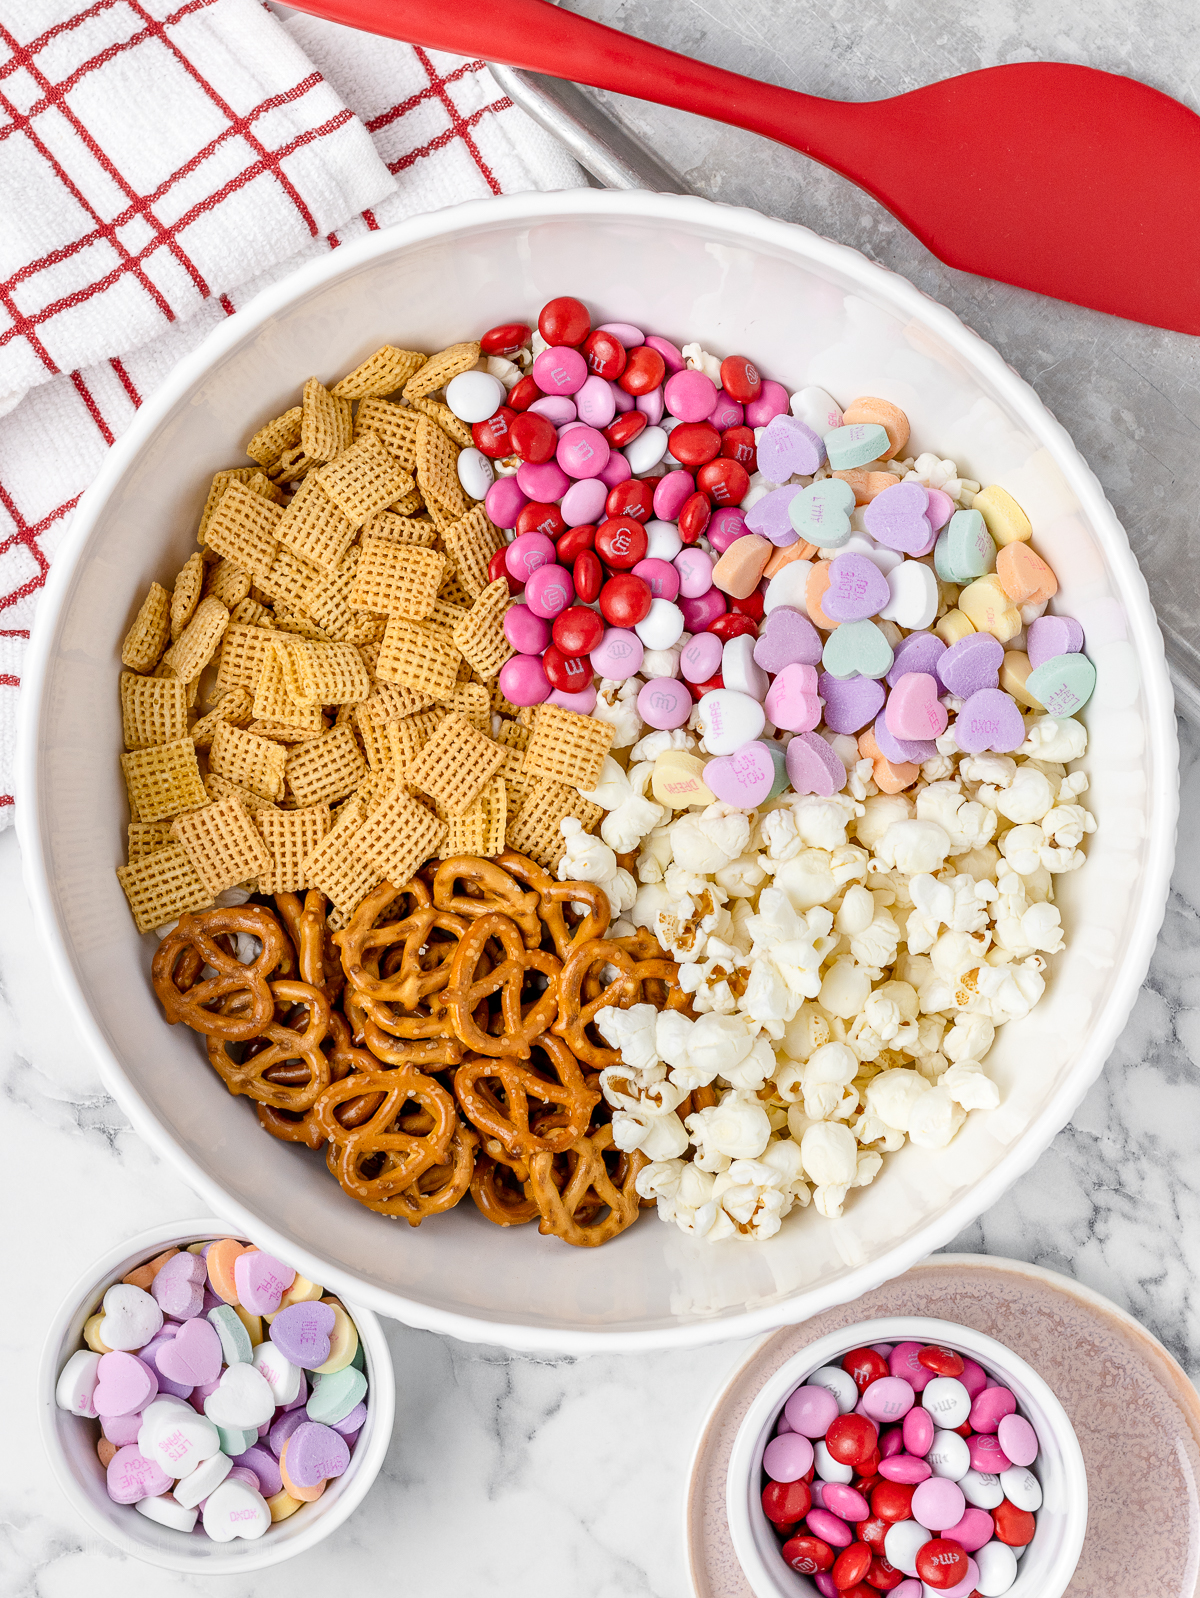 Step 2. Mixing together the plain popcorn, corn chex, mini pretzels, M&M's, and conversation hearts in a very large bowl.